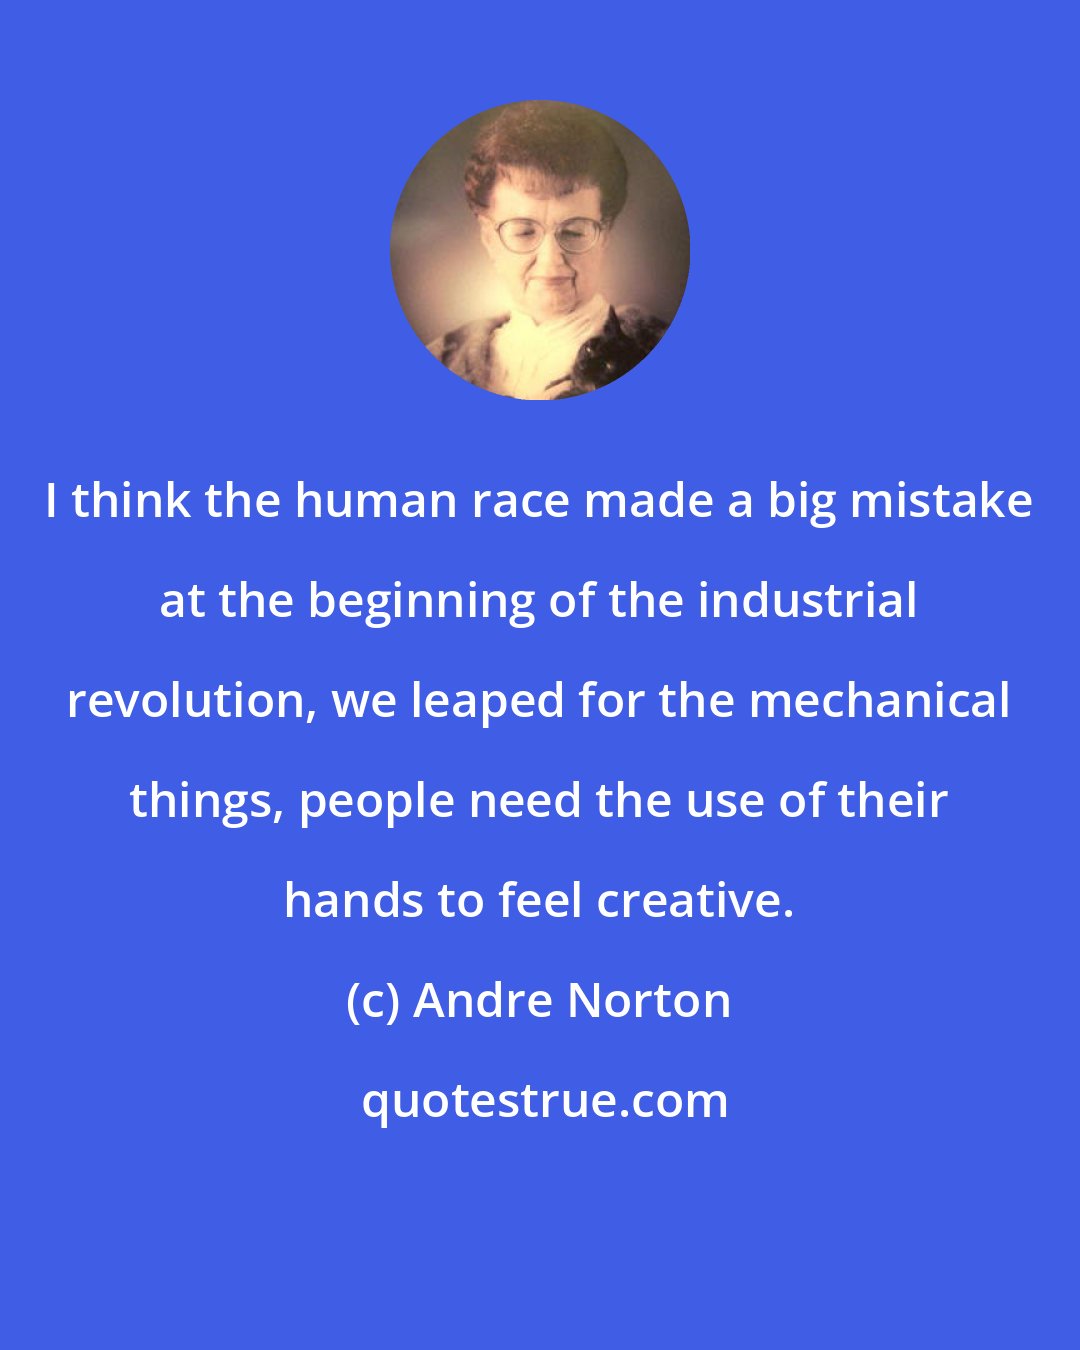 Andre Norton: I think the human race made a big mistake at the beginning of the industrial revolution, we leaped for the mechanical things, people need the use of their hands to feel creative.